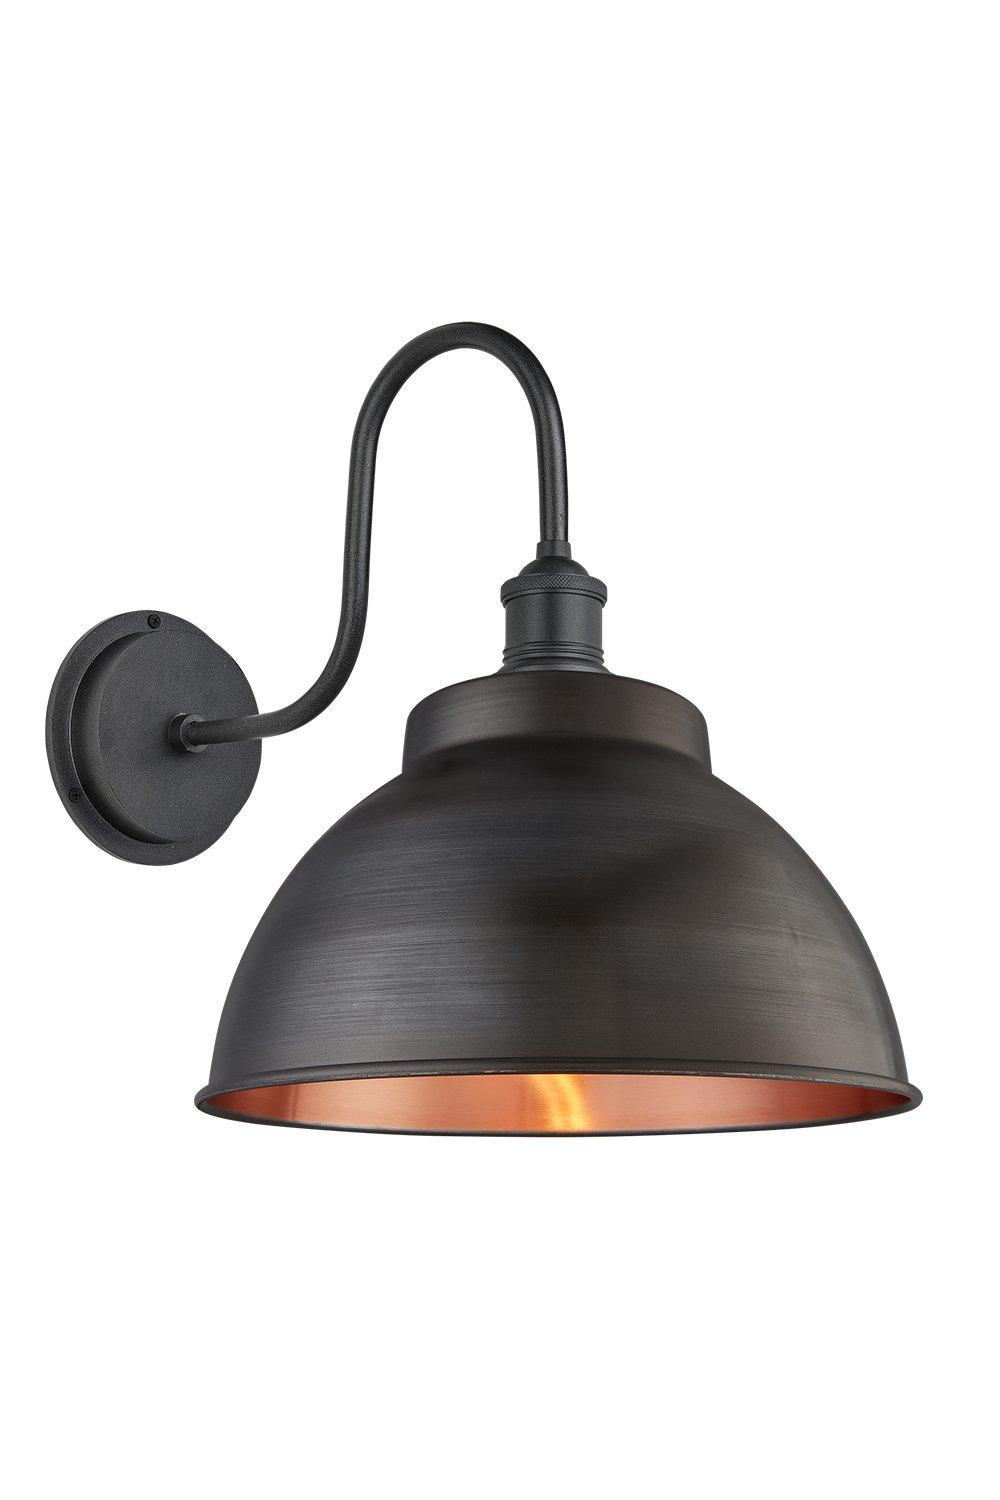 Swan Neck Outdoor & Bathroom Dome Wall Light, 13 Inch, Pewter & Copper, Pewter Holder, Globe Glass